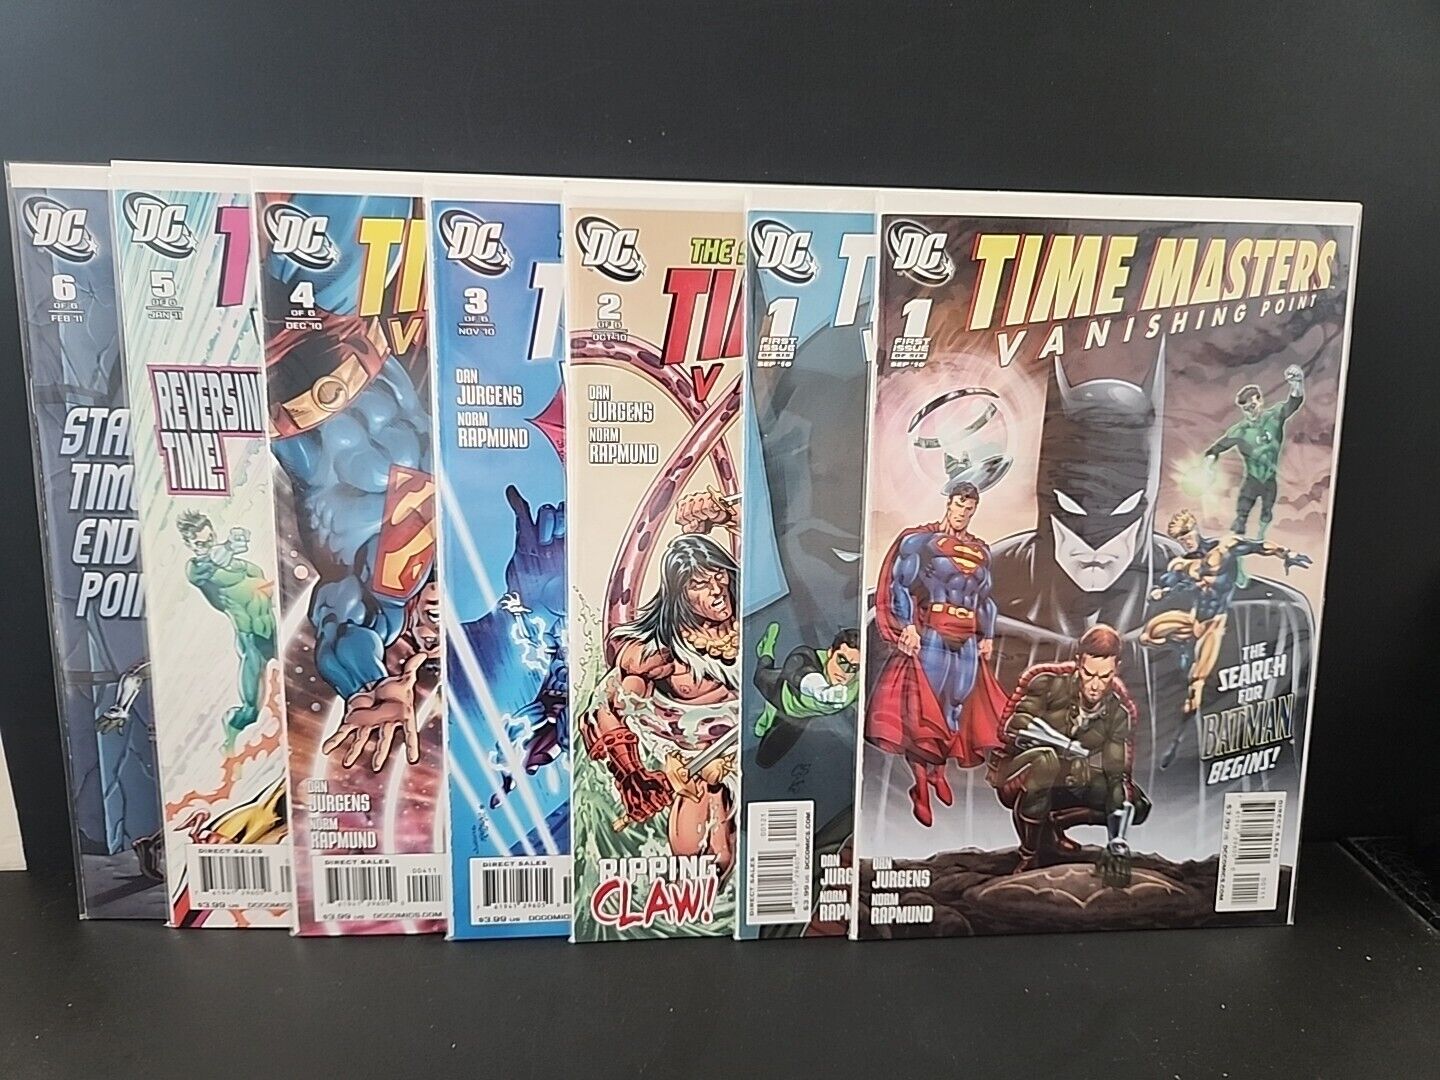 Time Masters: Vanishing Point #1-6 Complete Series + #1 Variant